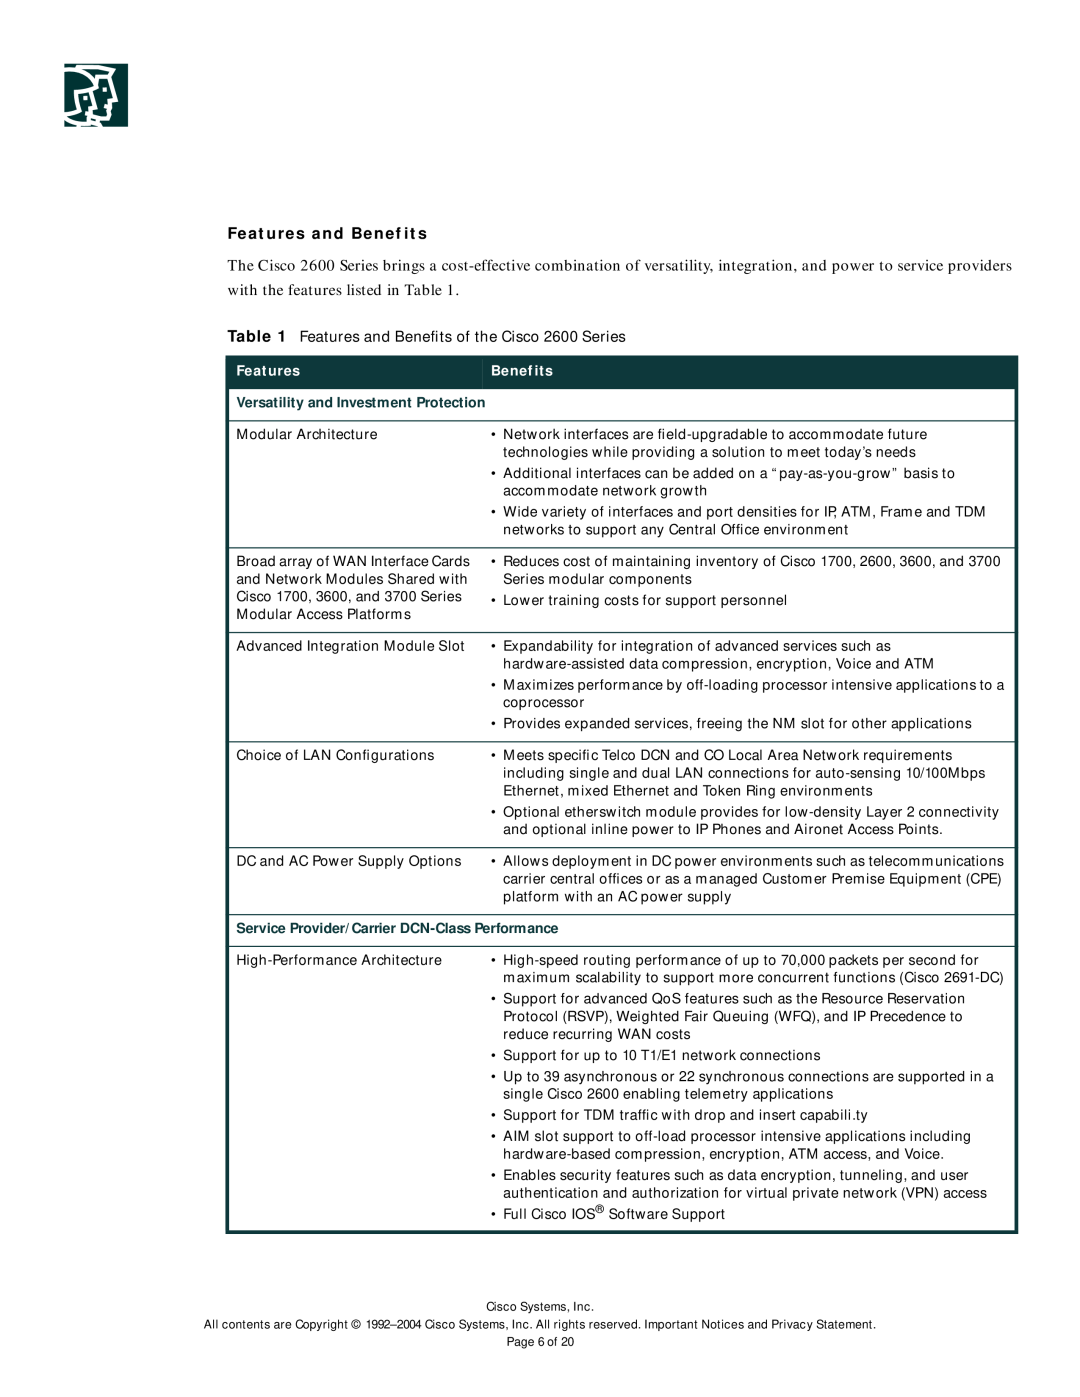 Cisco Systems 2600-DC Series manual Features and Benefits, with the features listed in Table 